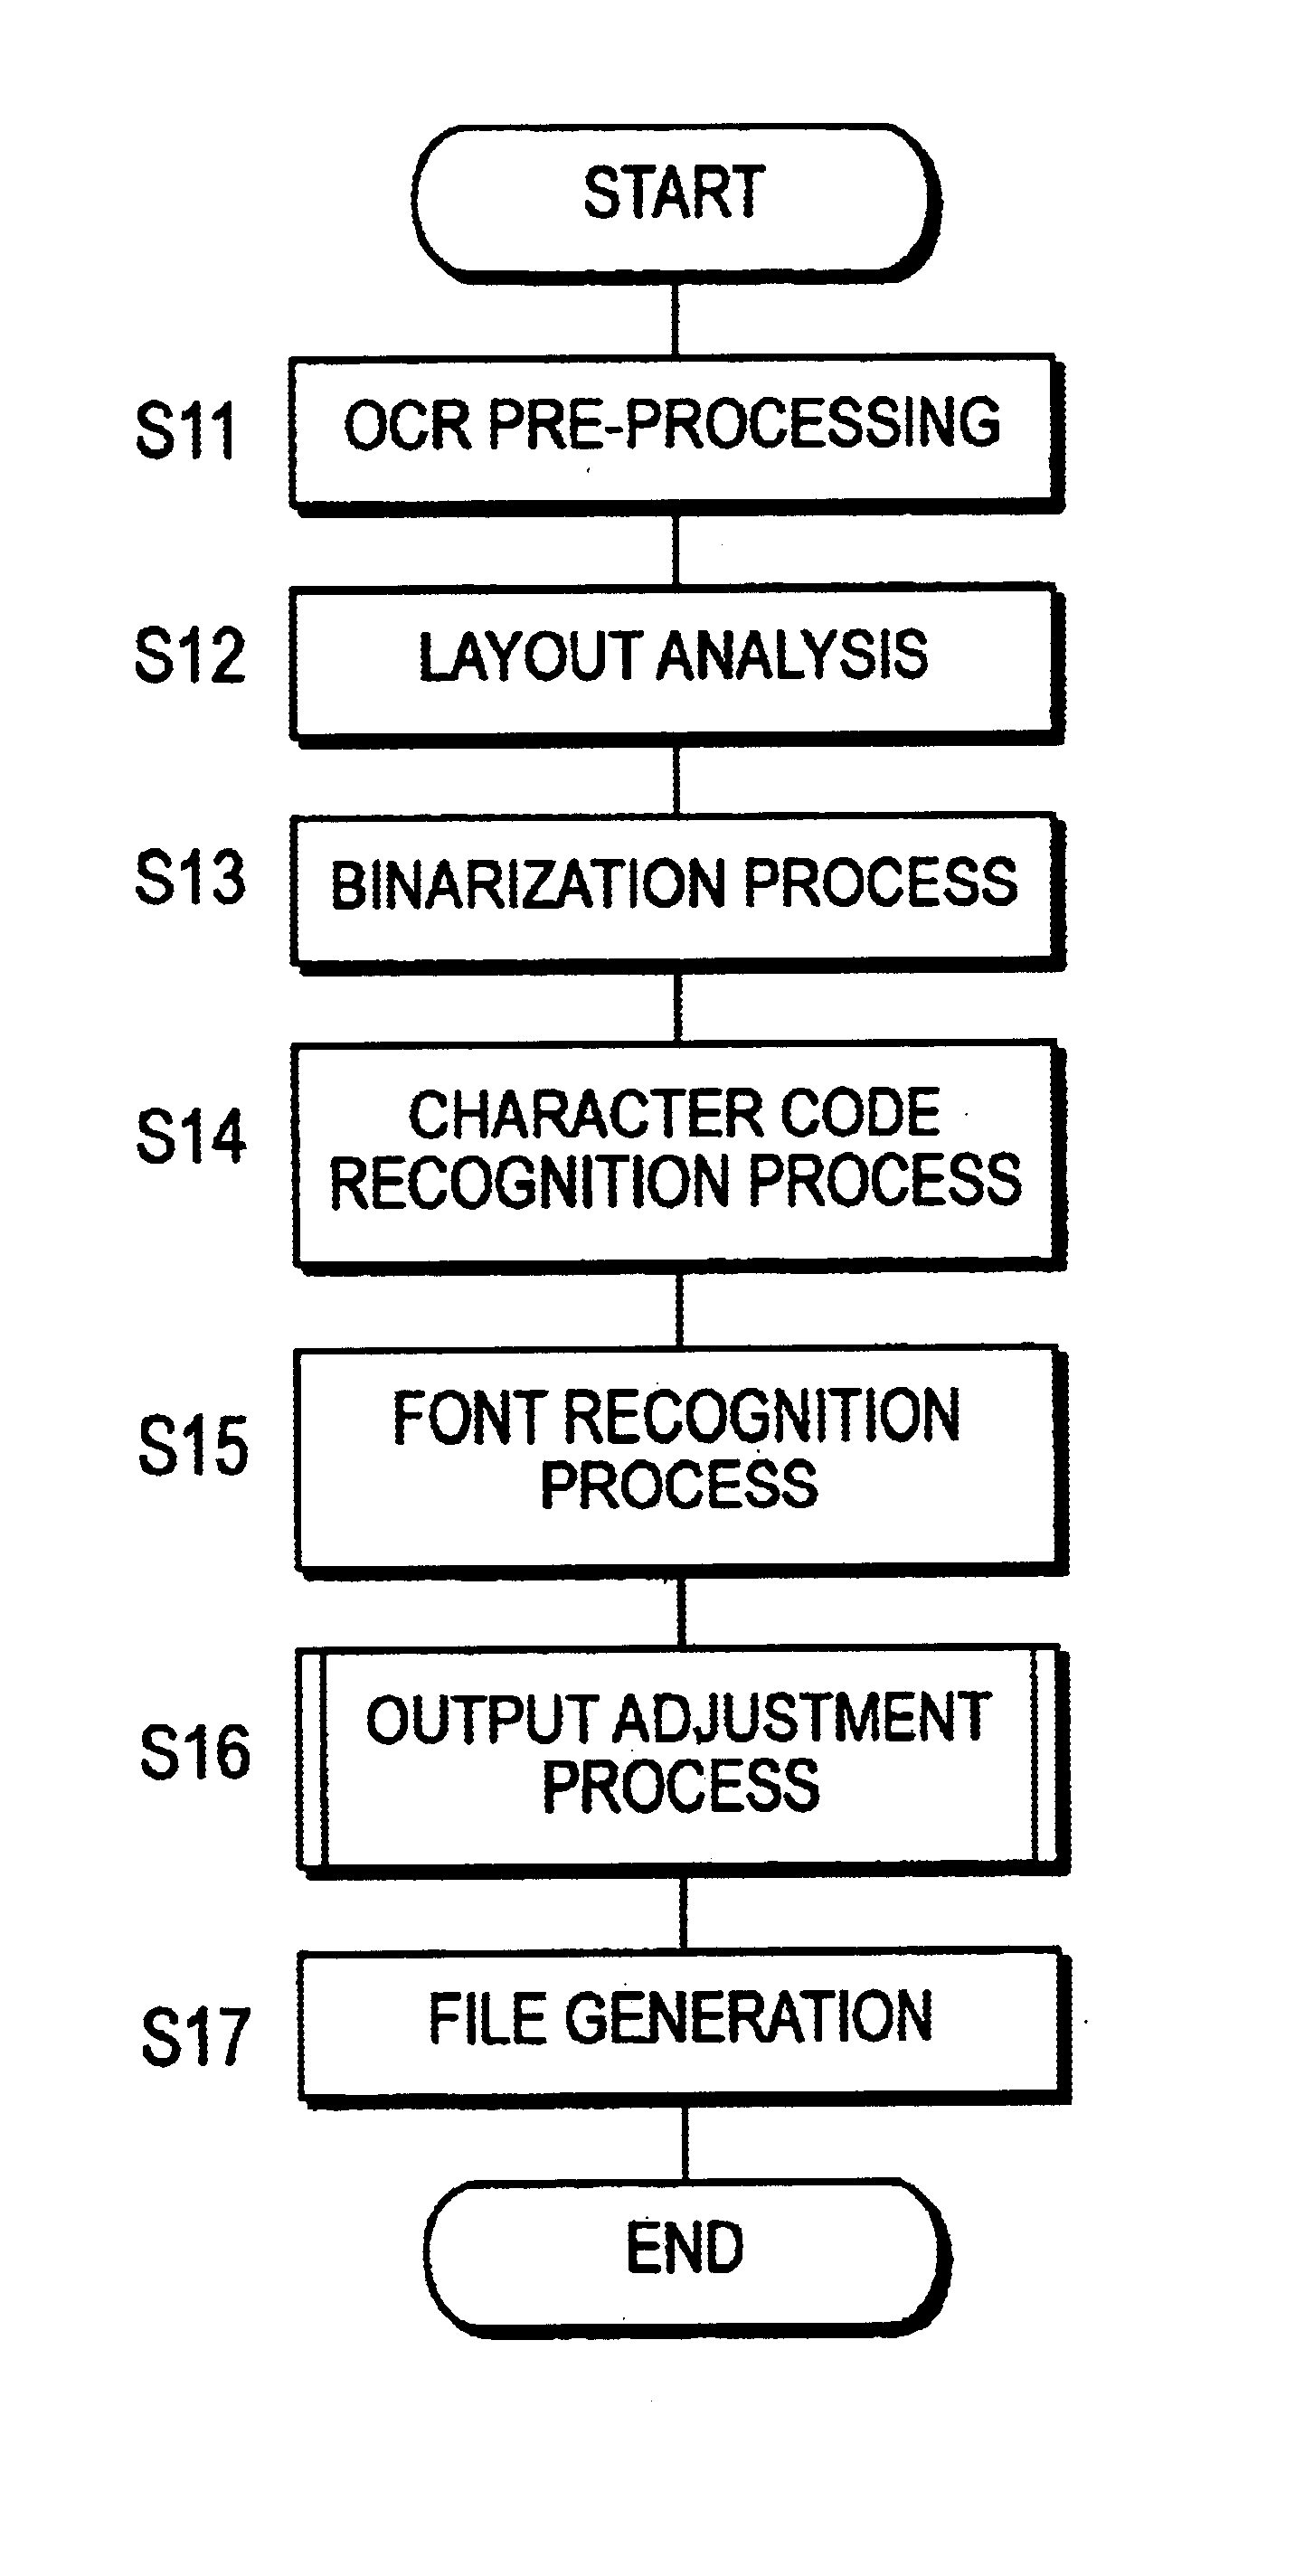 Image recognition apparatus, method and program product